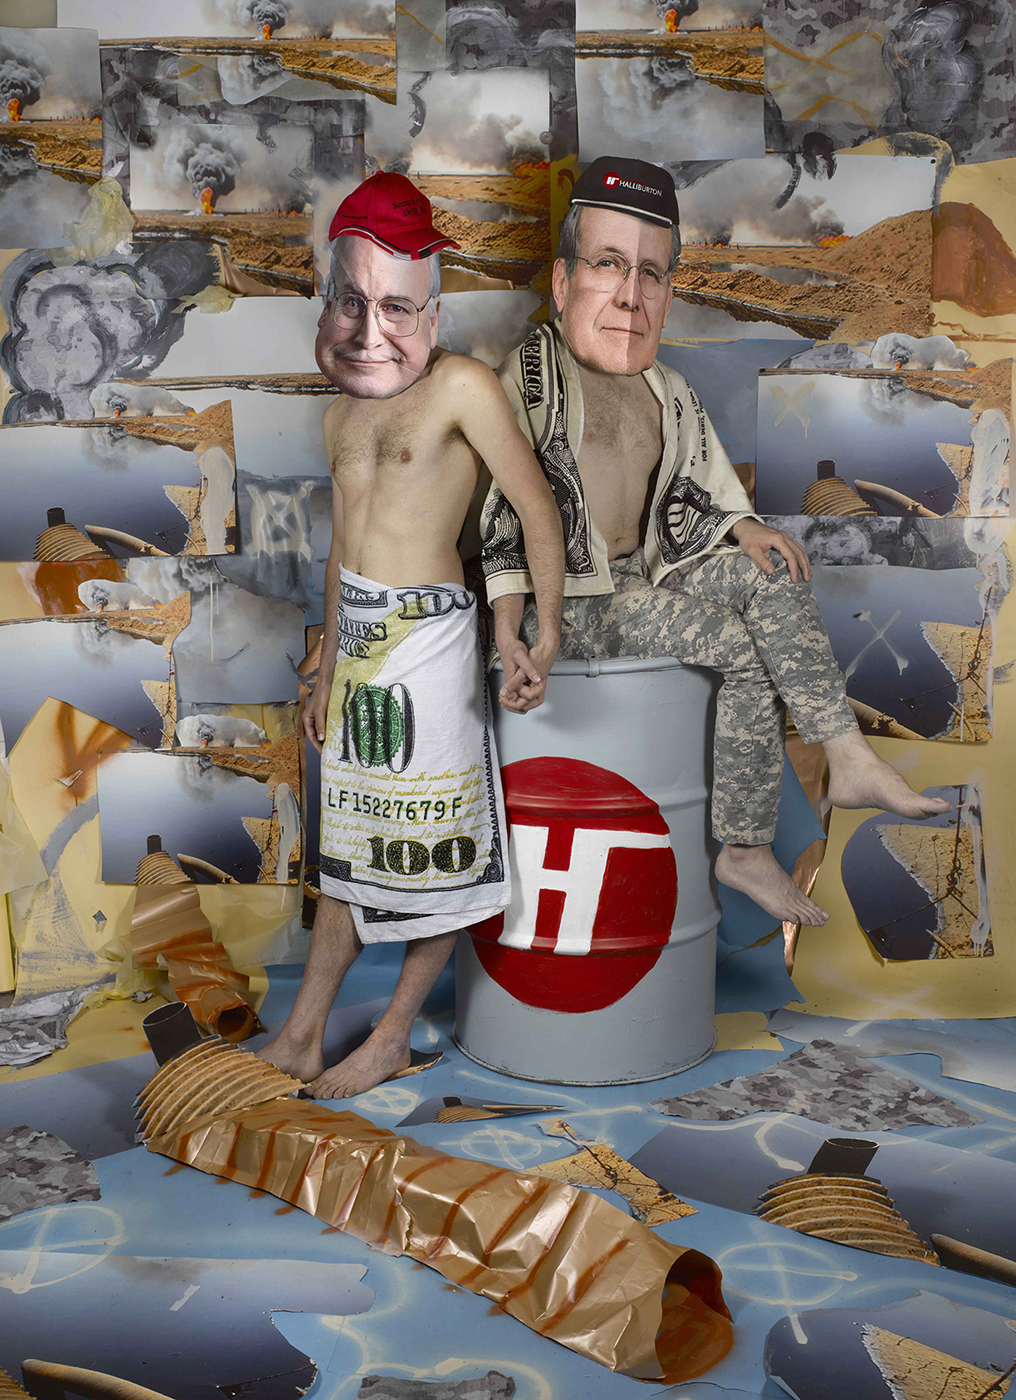 Collage; US politician and CEO holding hands and wearing hundred-dollar bills as towels, leaning and sitting on a barrel of oil with a backdrop showing oil infrastructure.